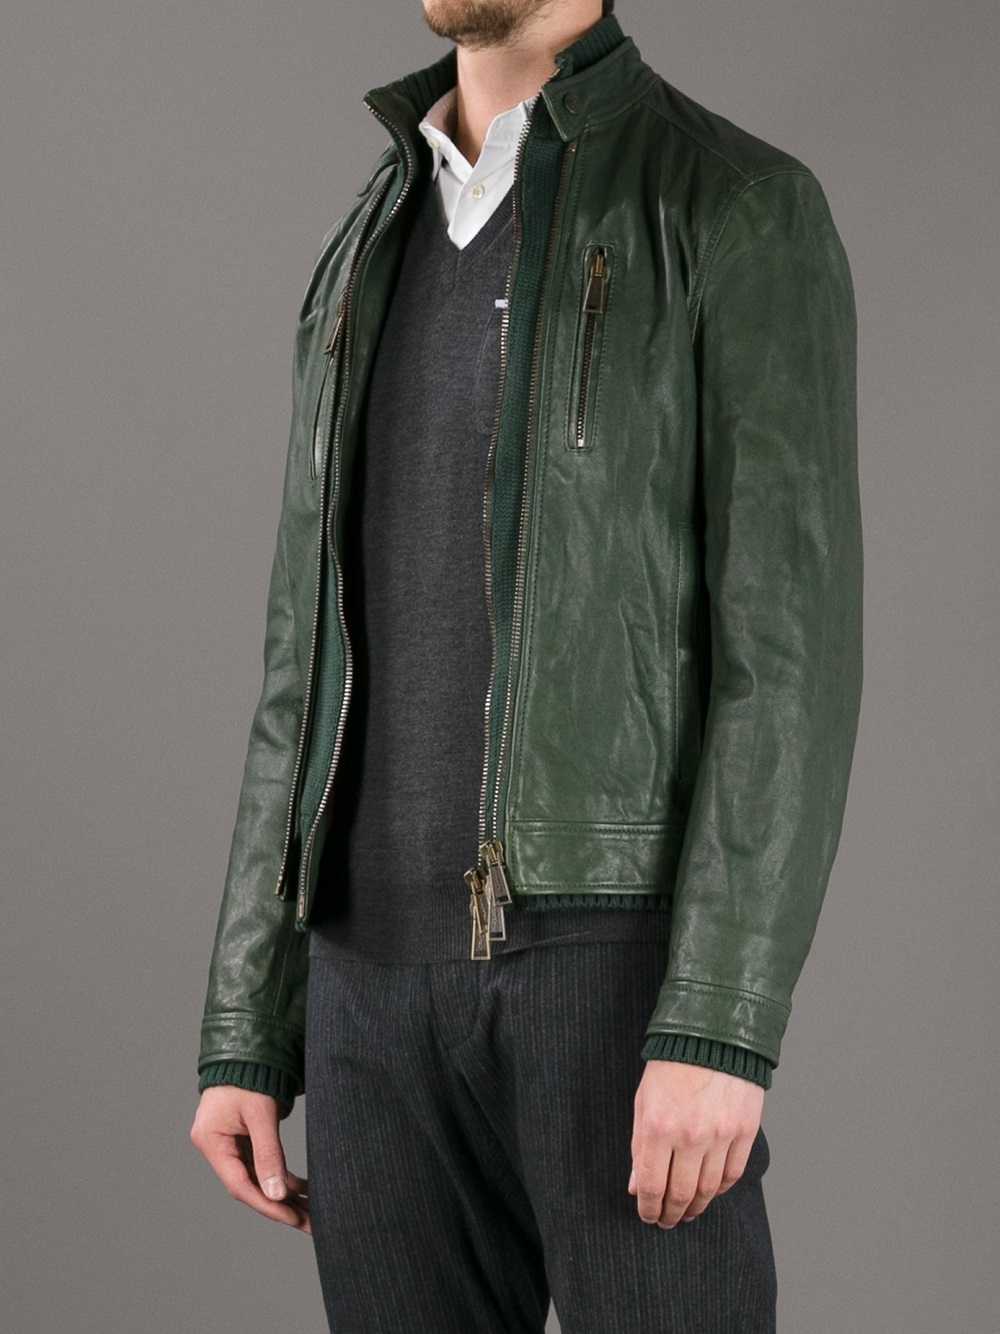 Lyst - Dsquared² Layered Leather Jacket in Green for Men